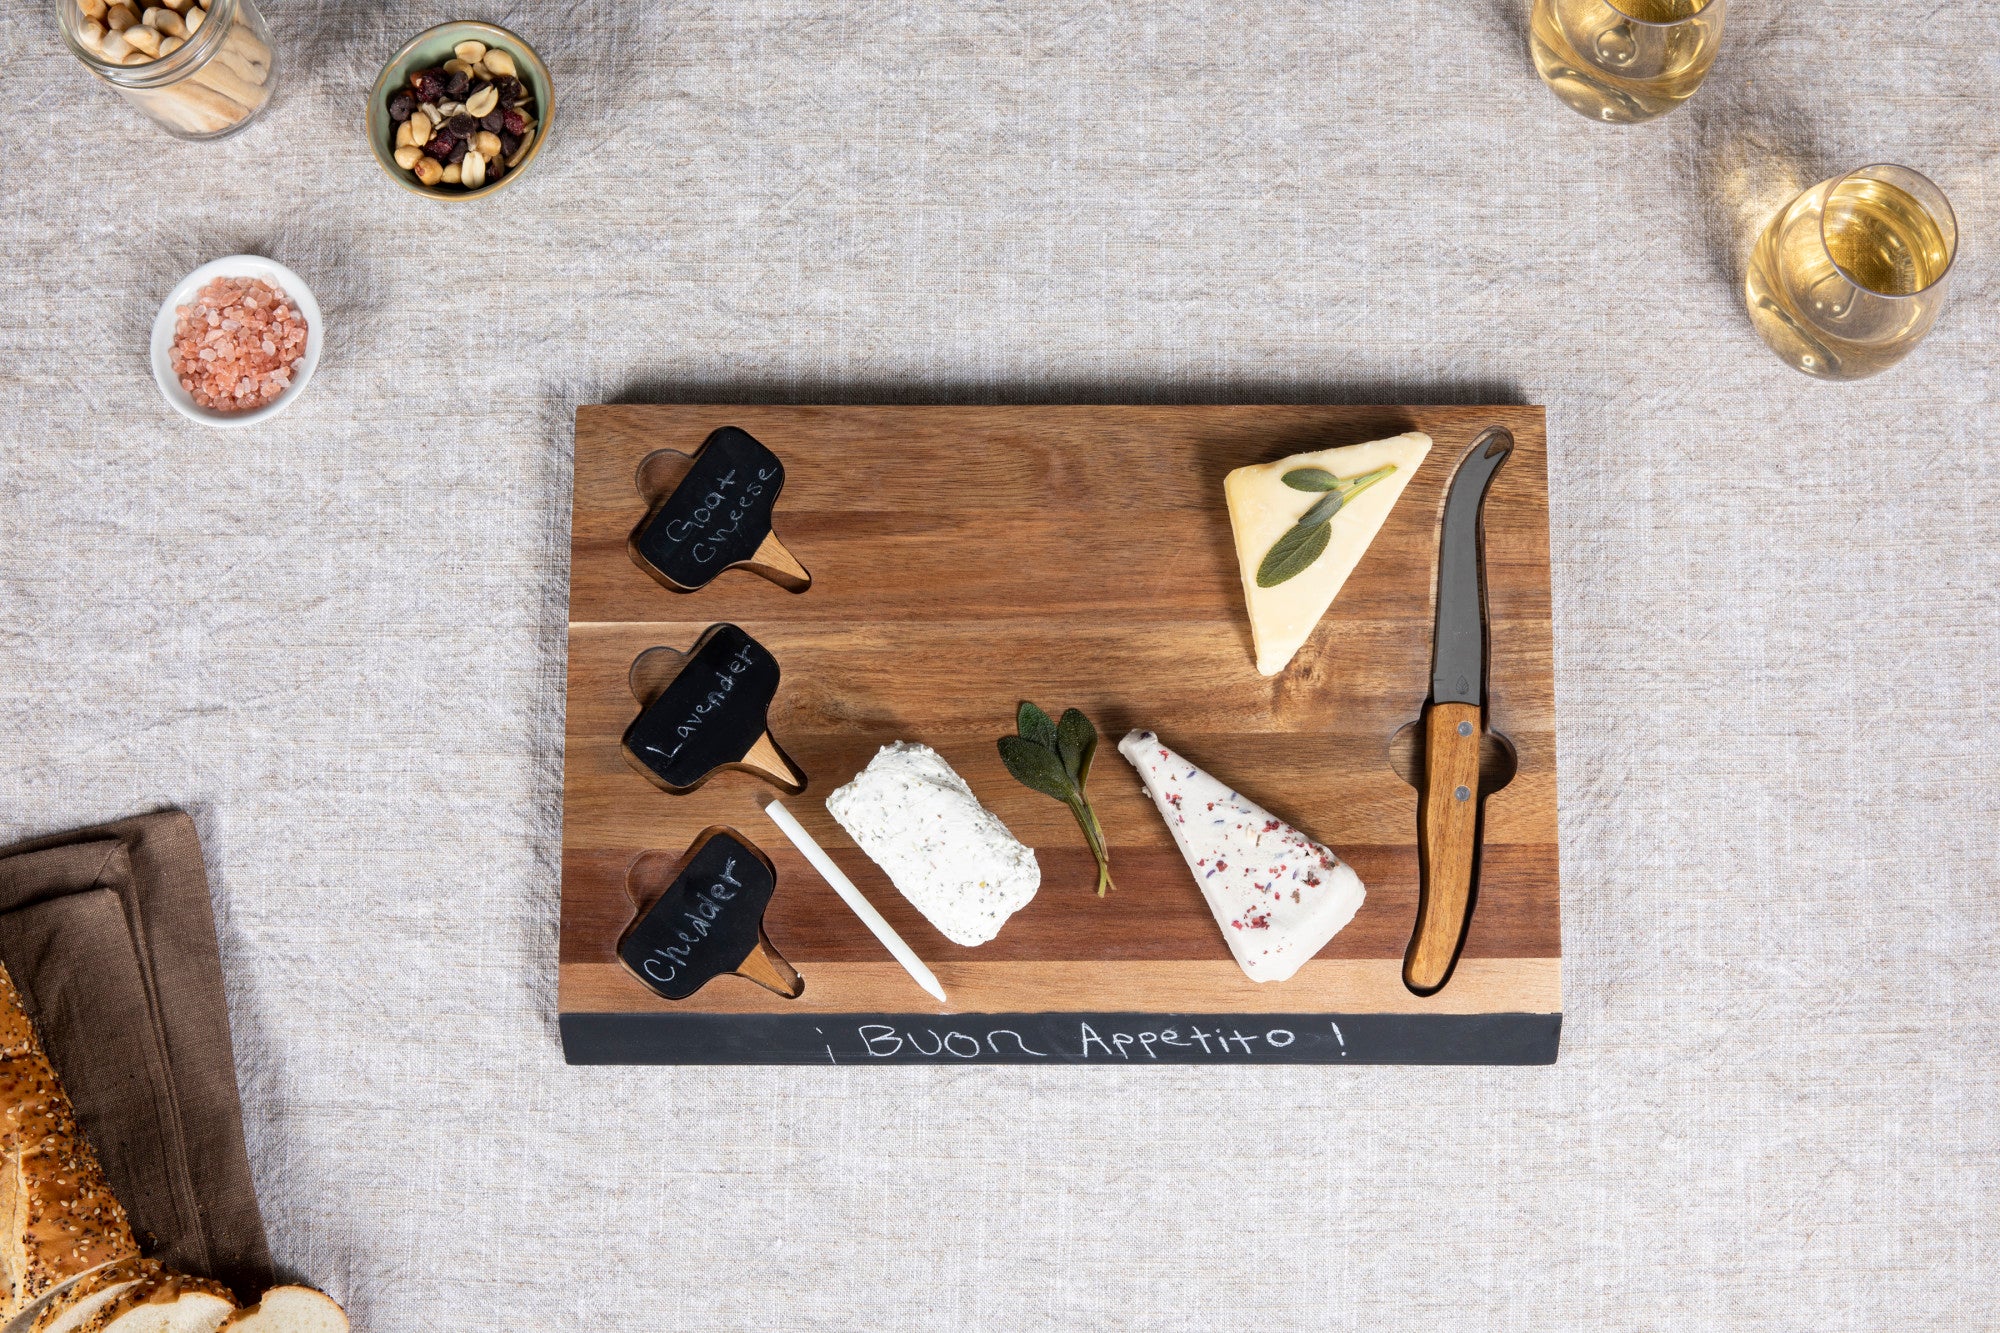 Pittsburgh Panthers - Delio Acacia Cheese Cutting Board & Tools Set